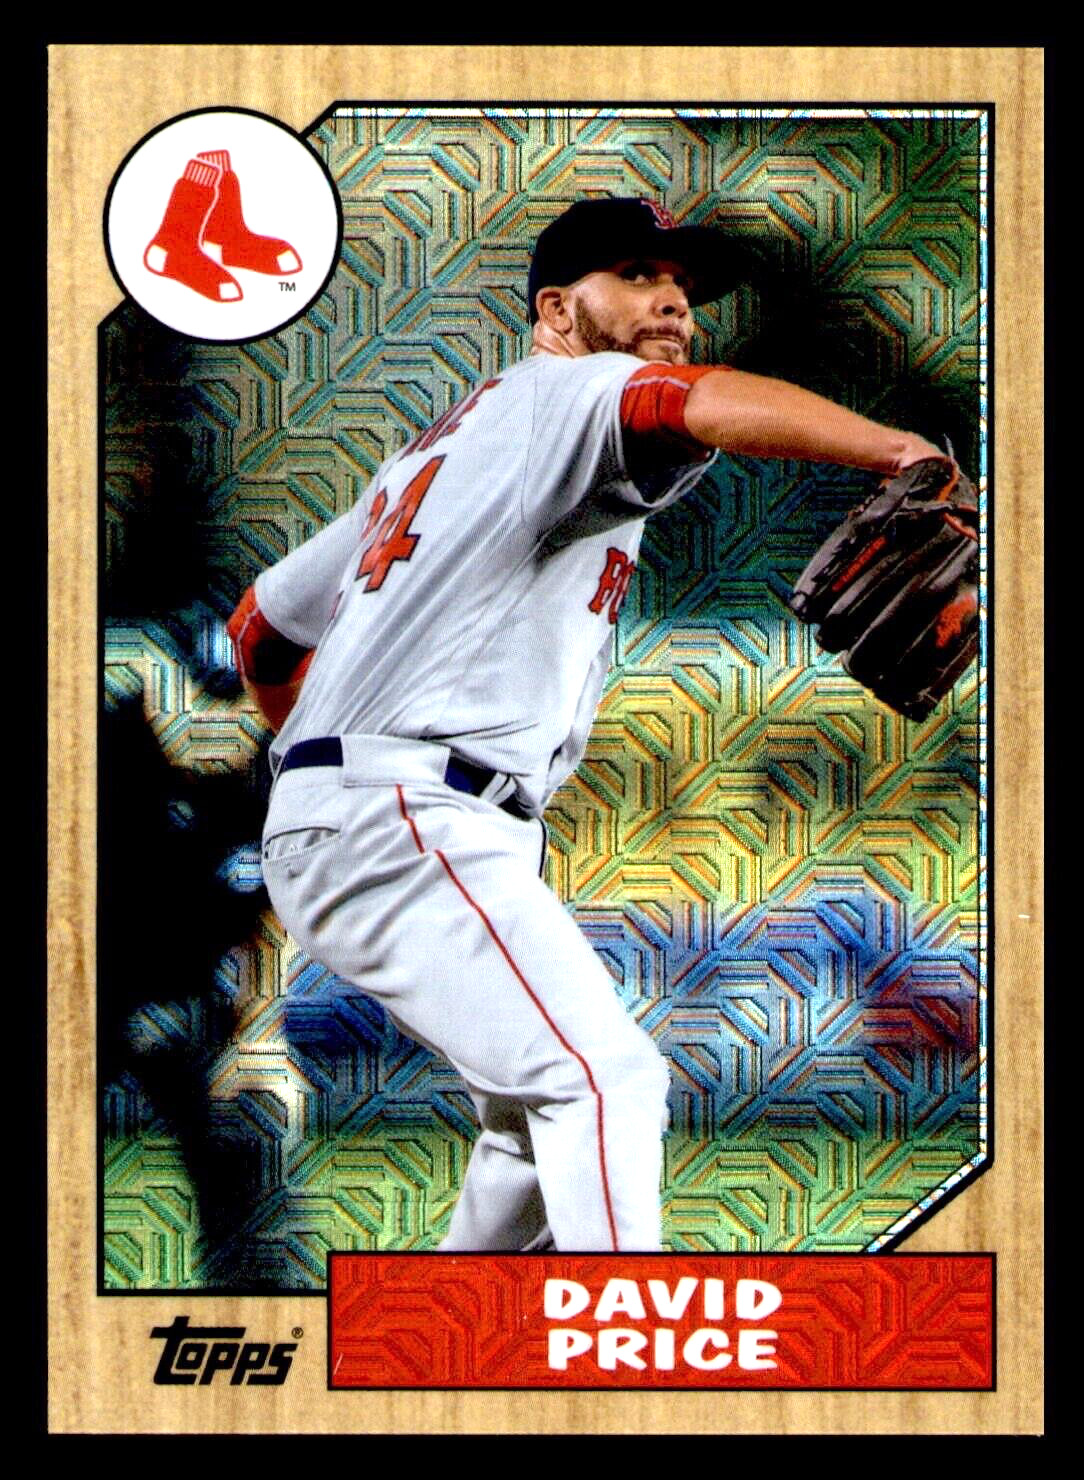 2017 Topps David Price 1987 Topps Silver Pack Chrome #87-DP - Boston Red Sox